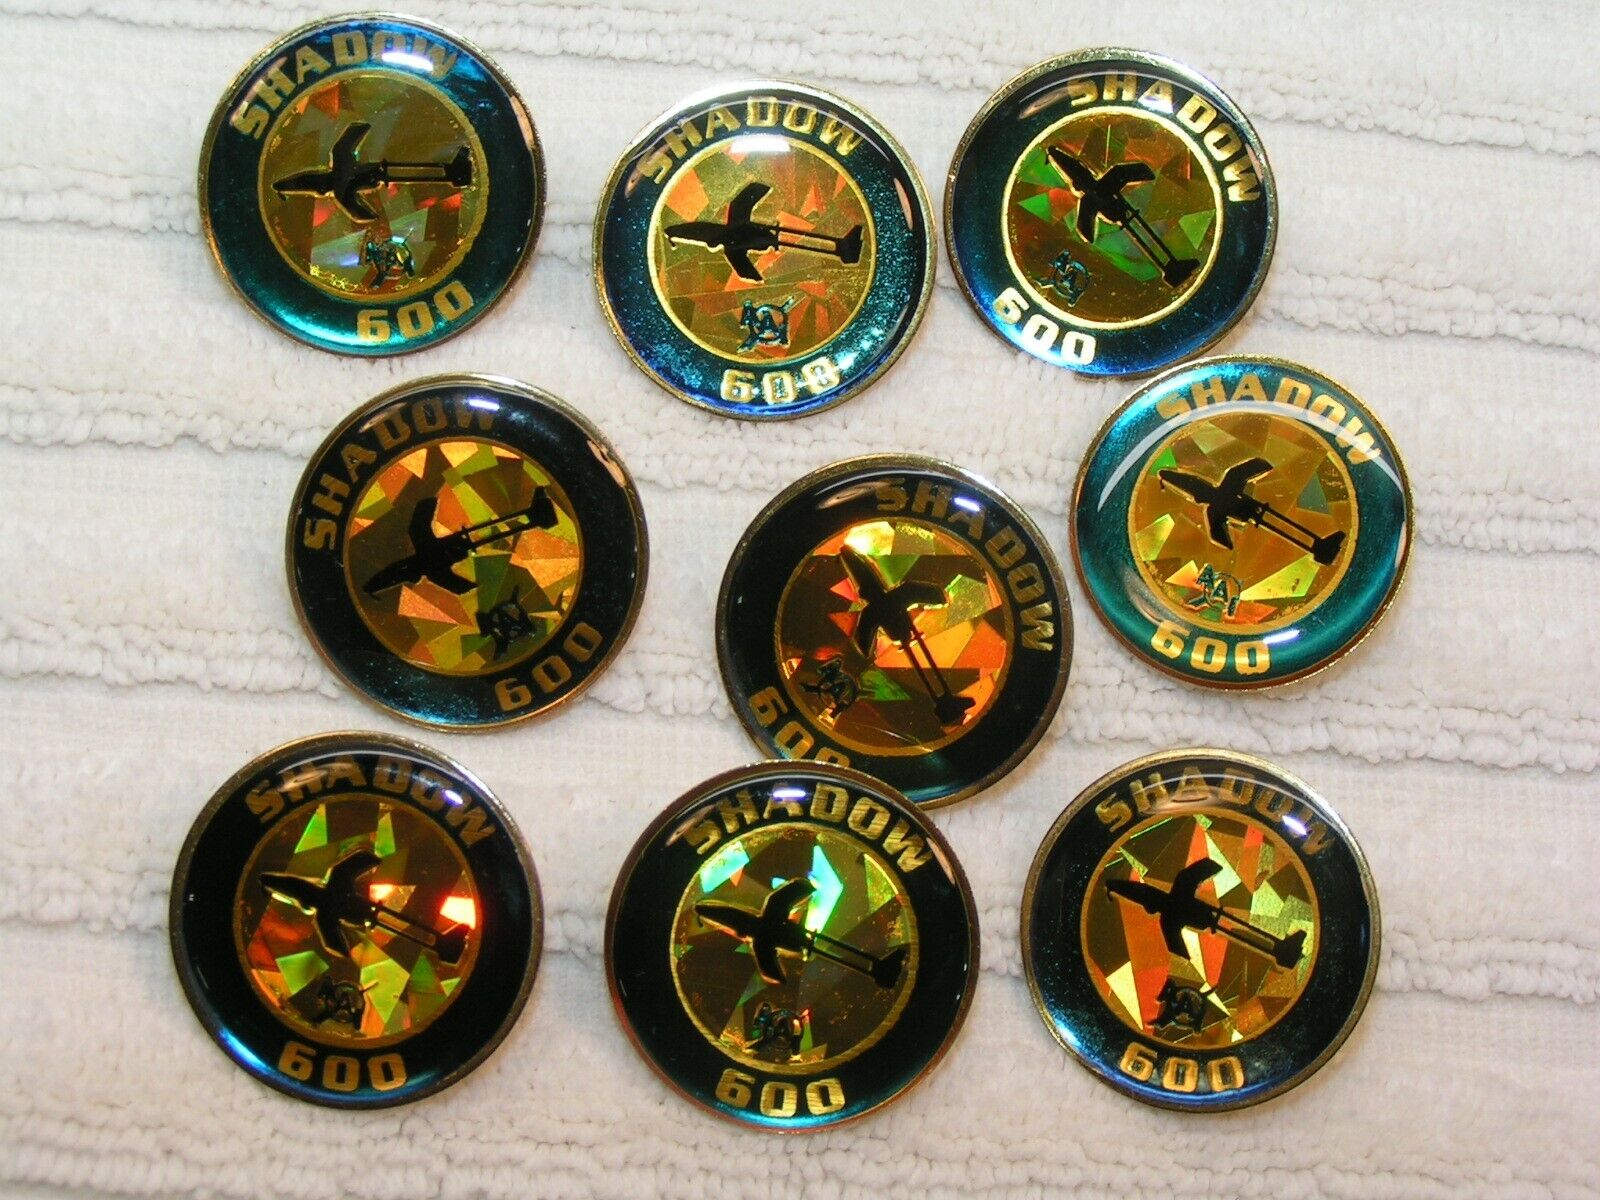 Group of Nine Shadow 600 Military Drone Lapel Pins